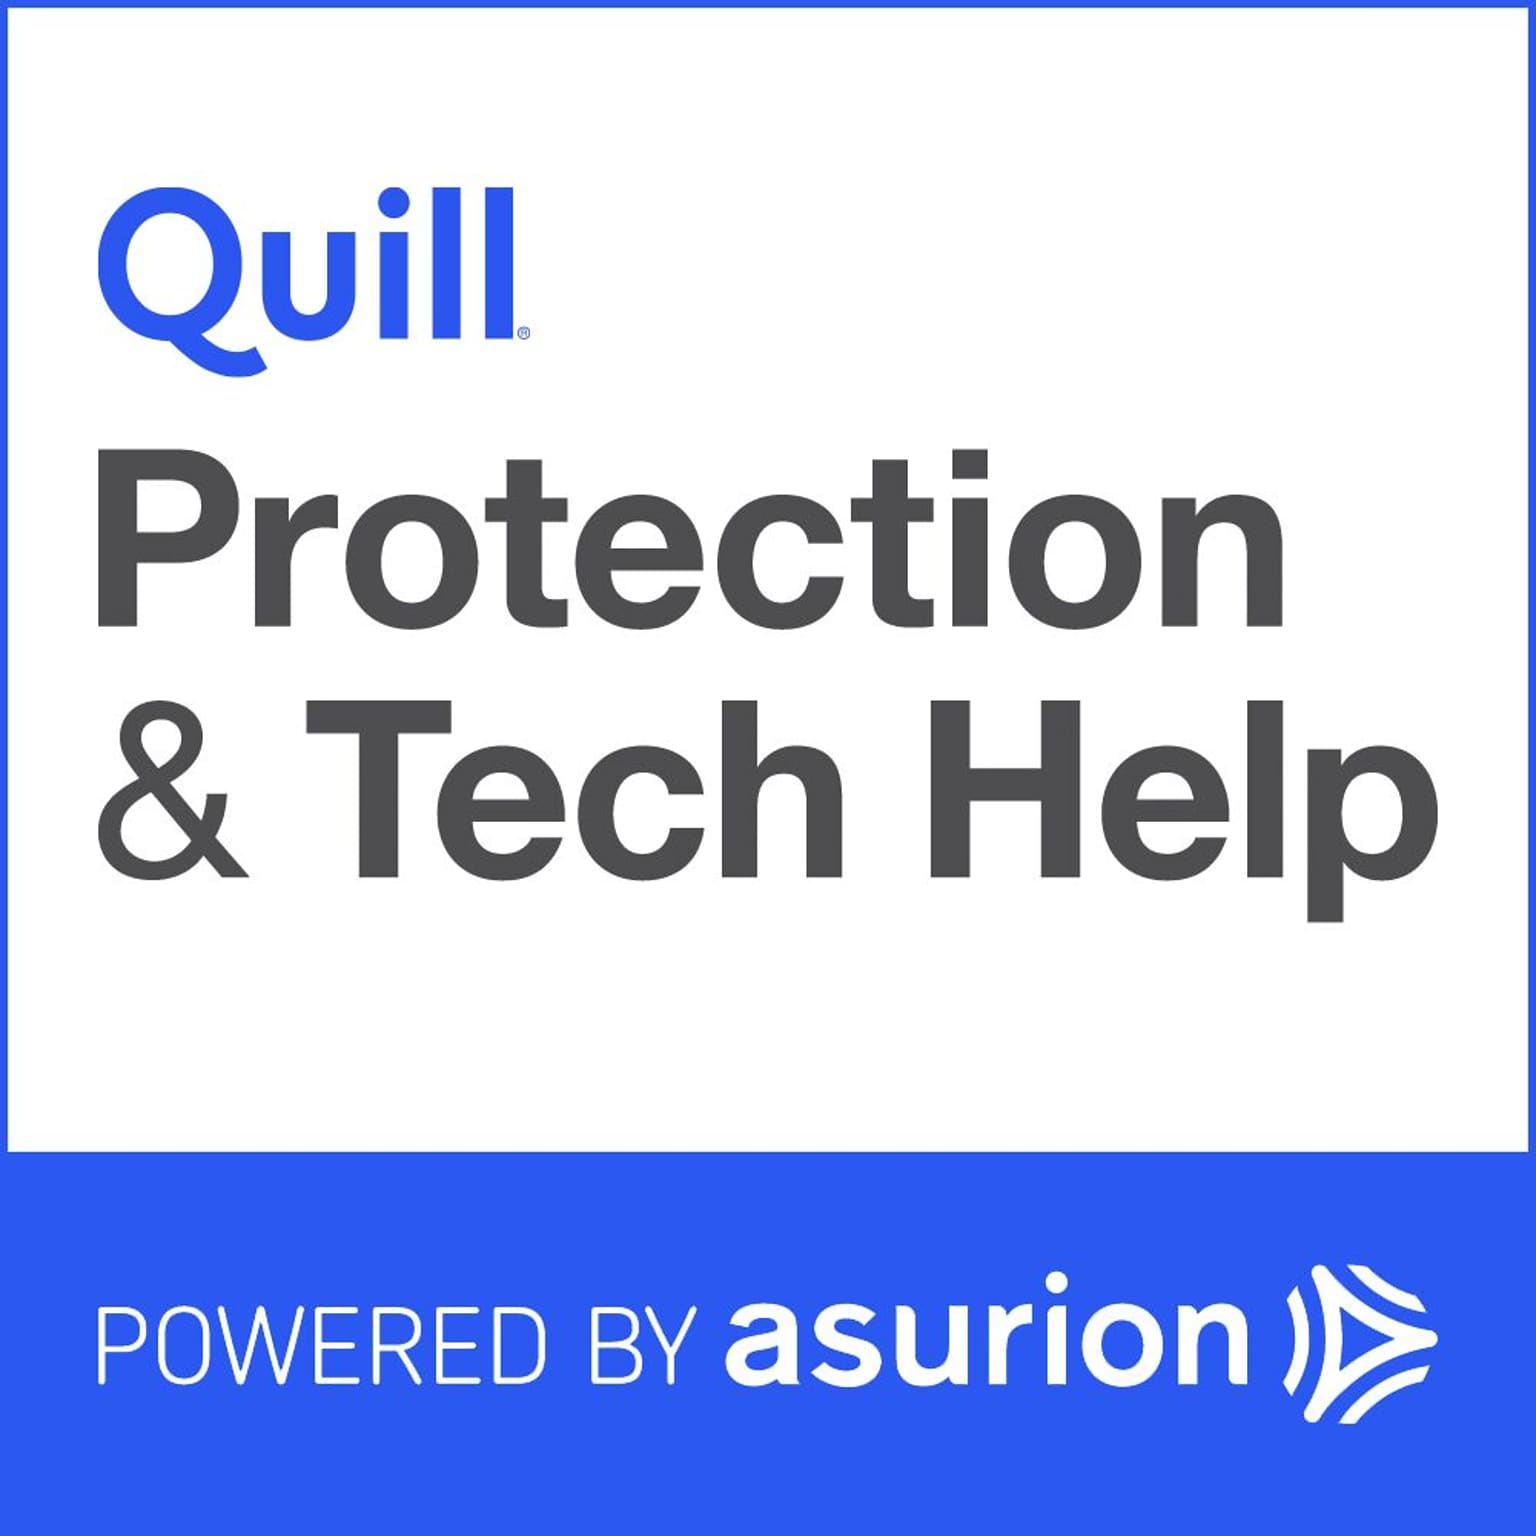 Quill.com 4 Year Computer/Tablet Protection & Tech Help Plan $300+